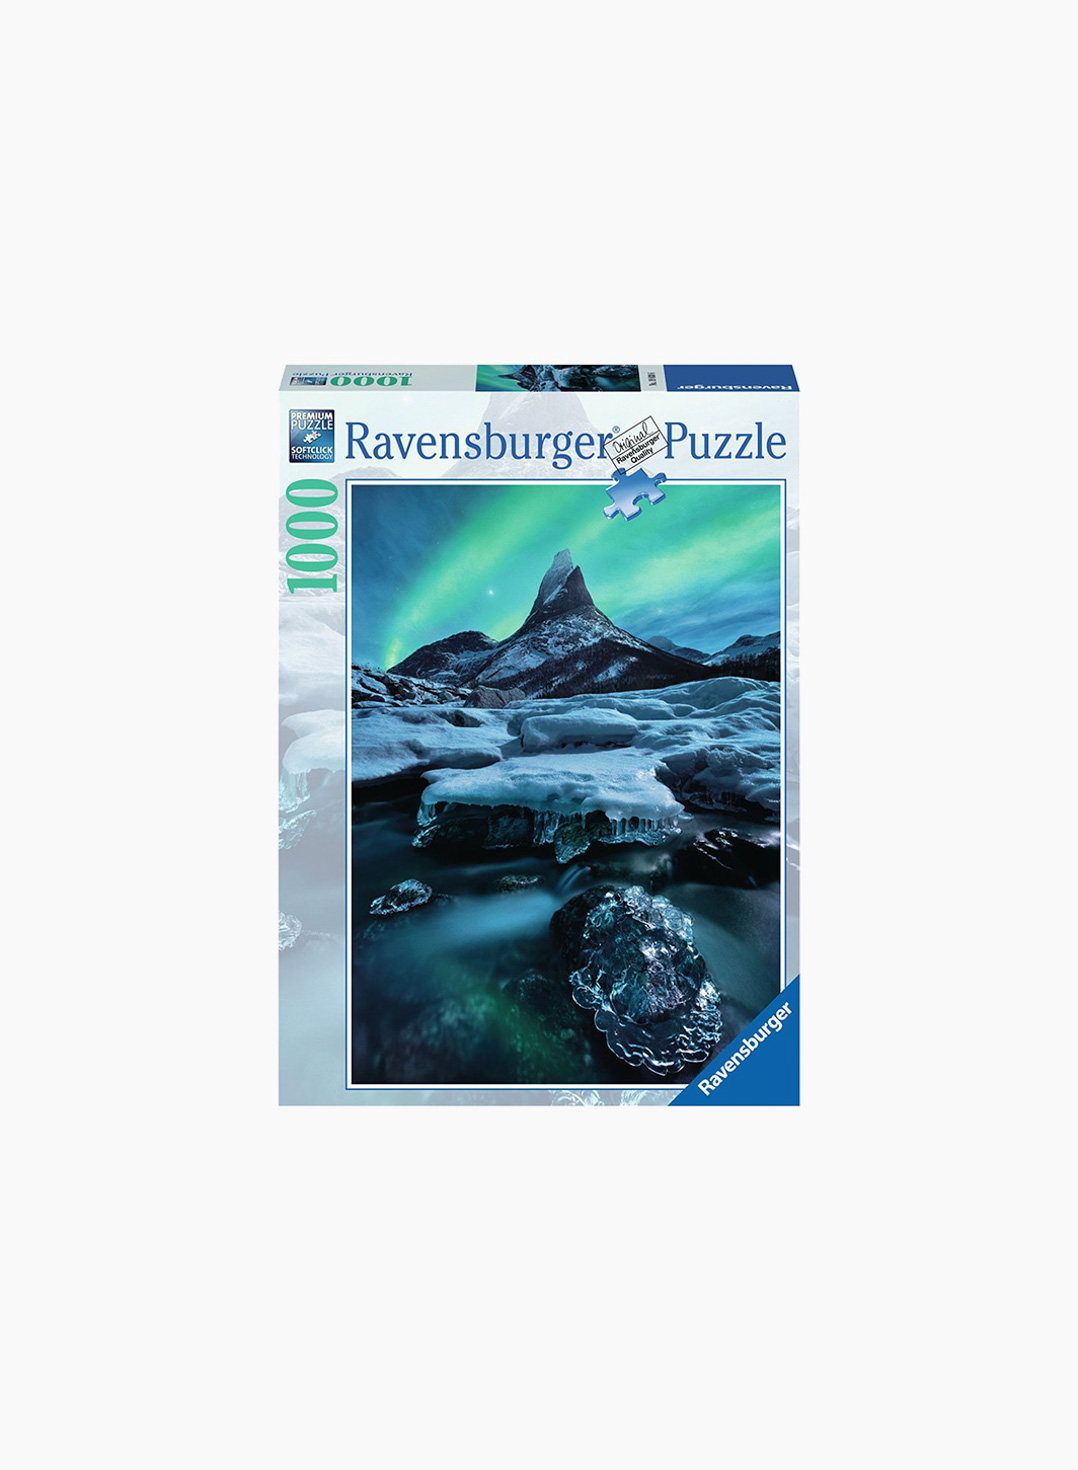 Ravensburger Puzzle Stetind in North-Norway 1000p